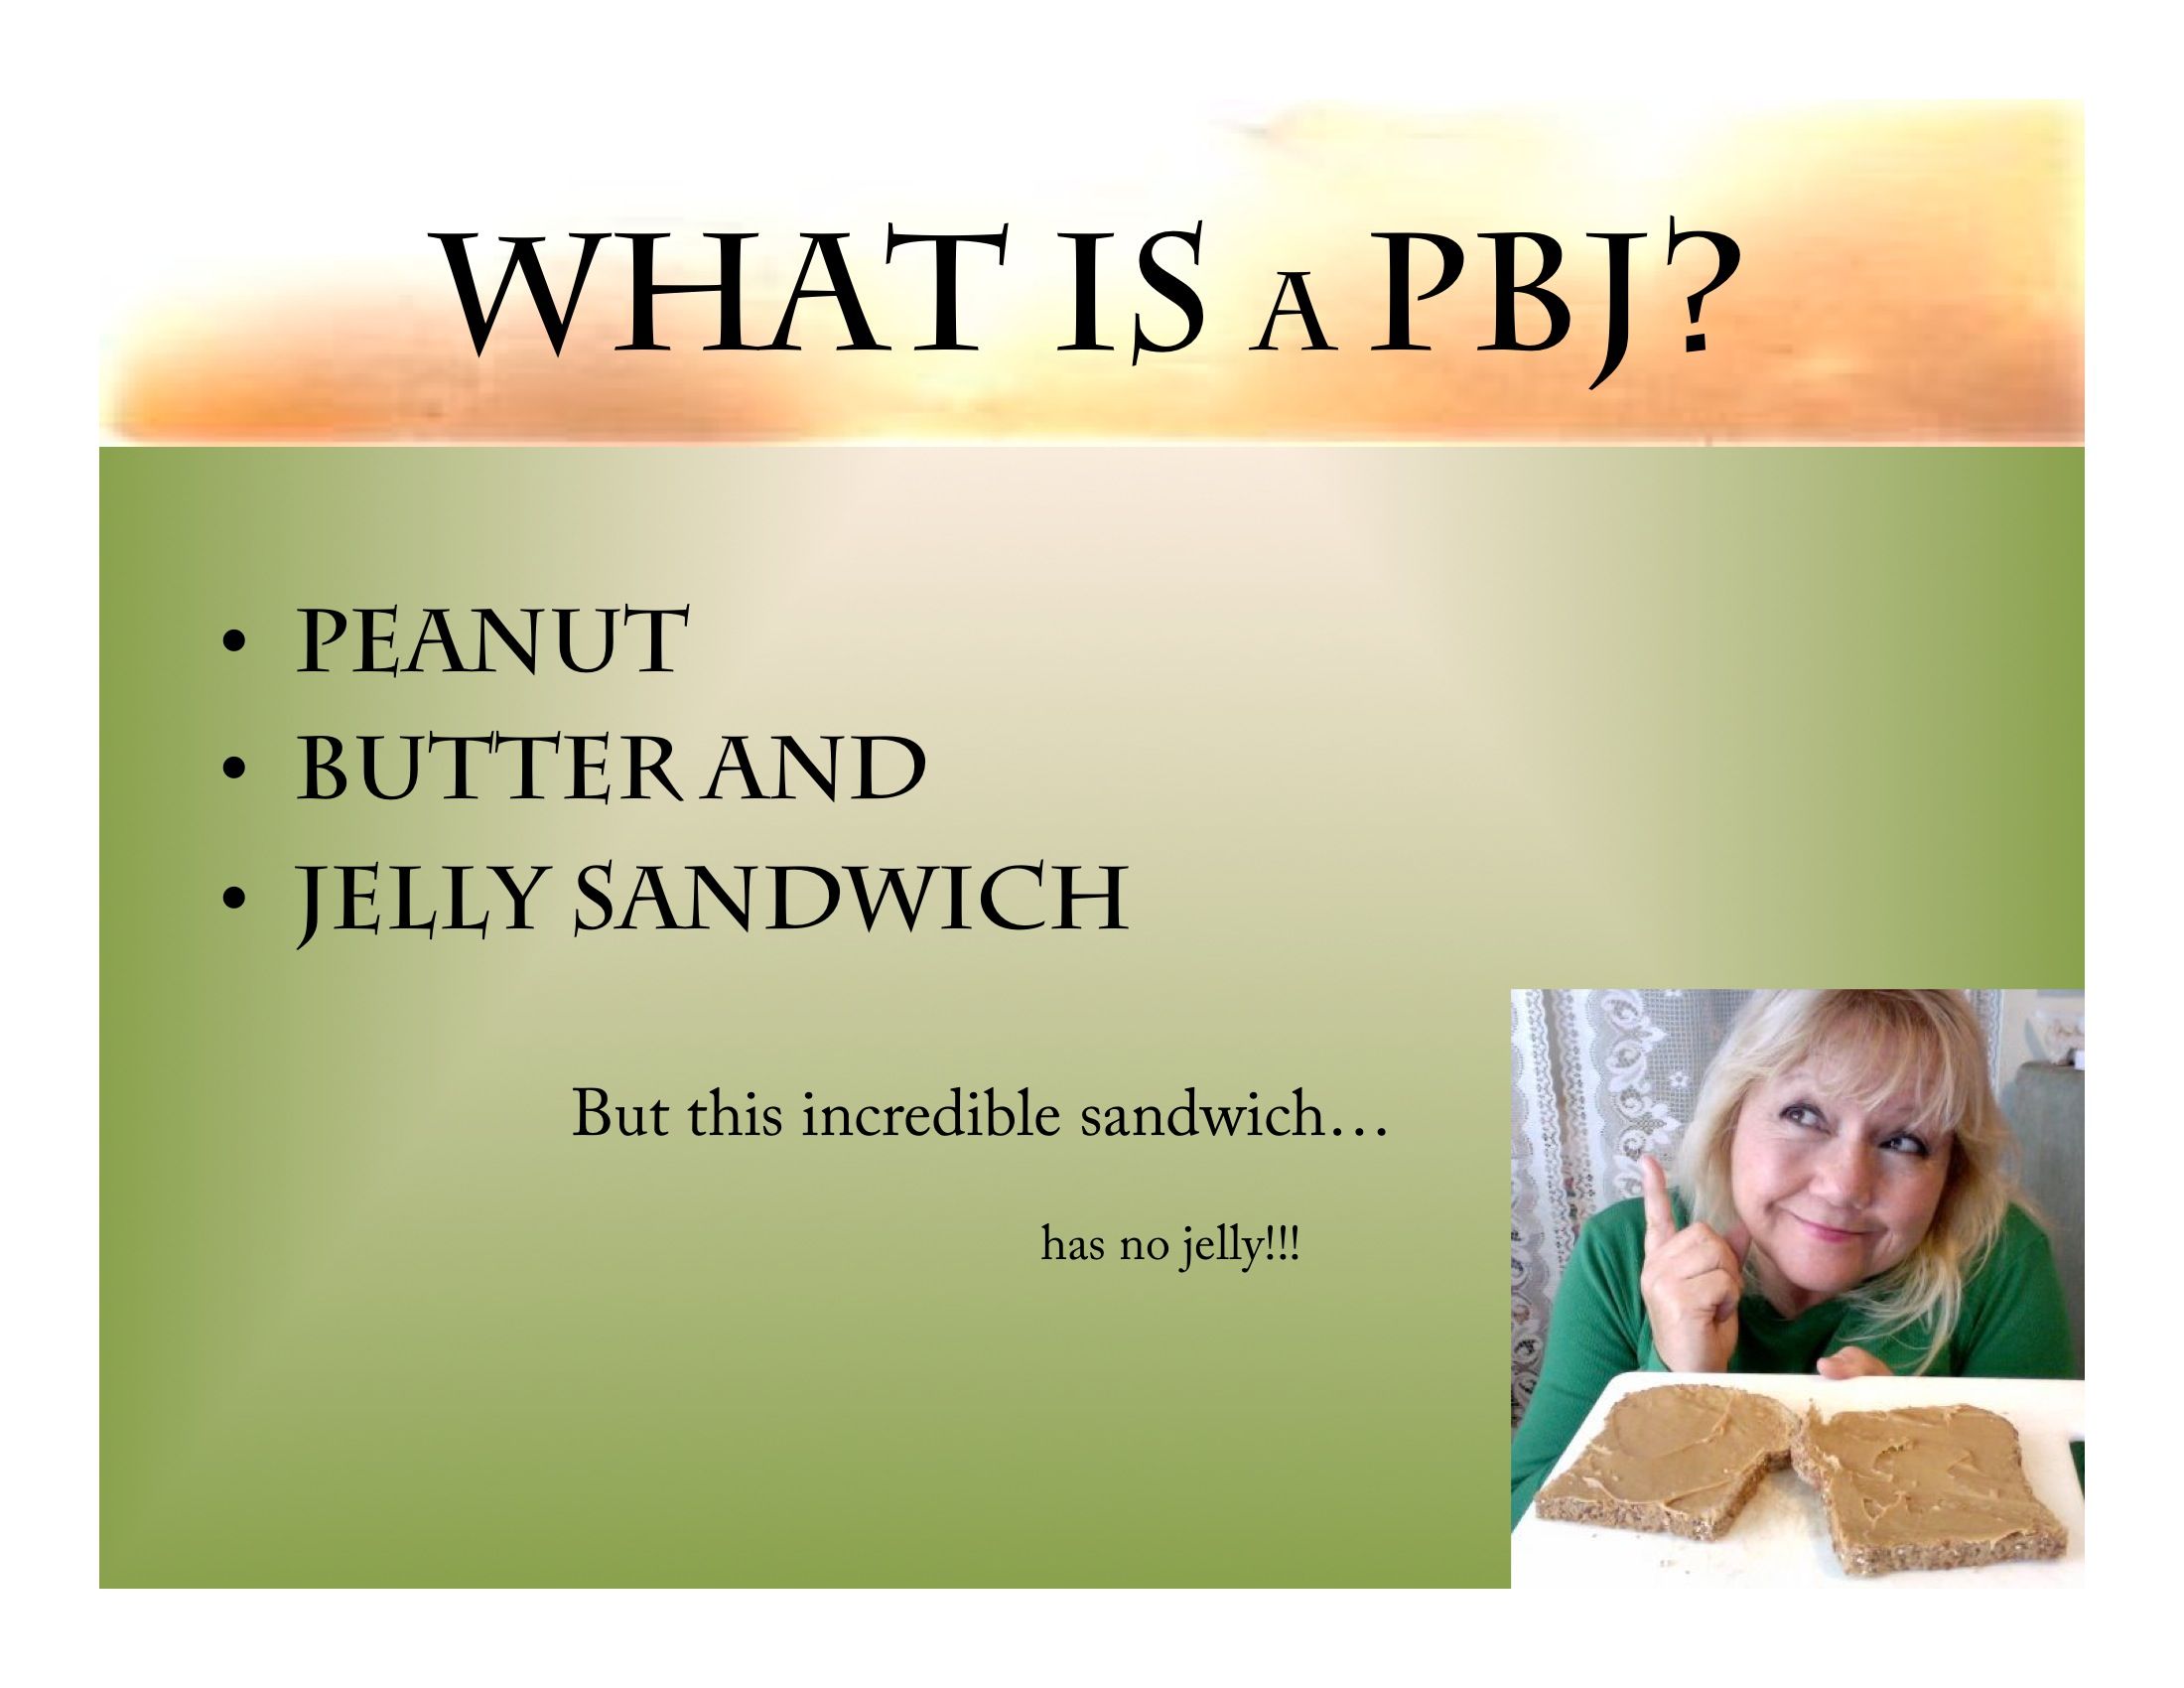 What is a PBJ?